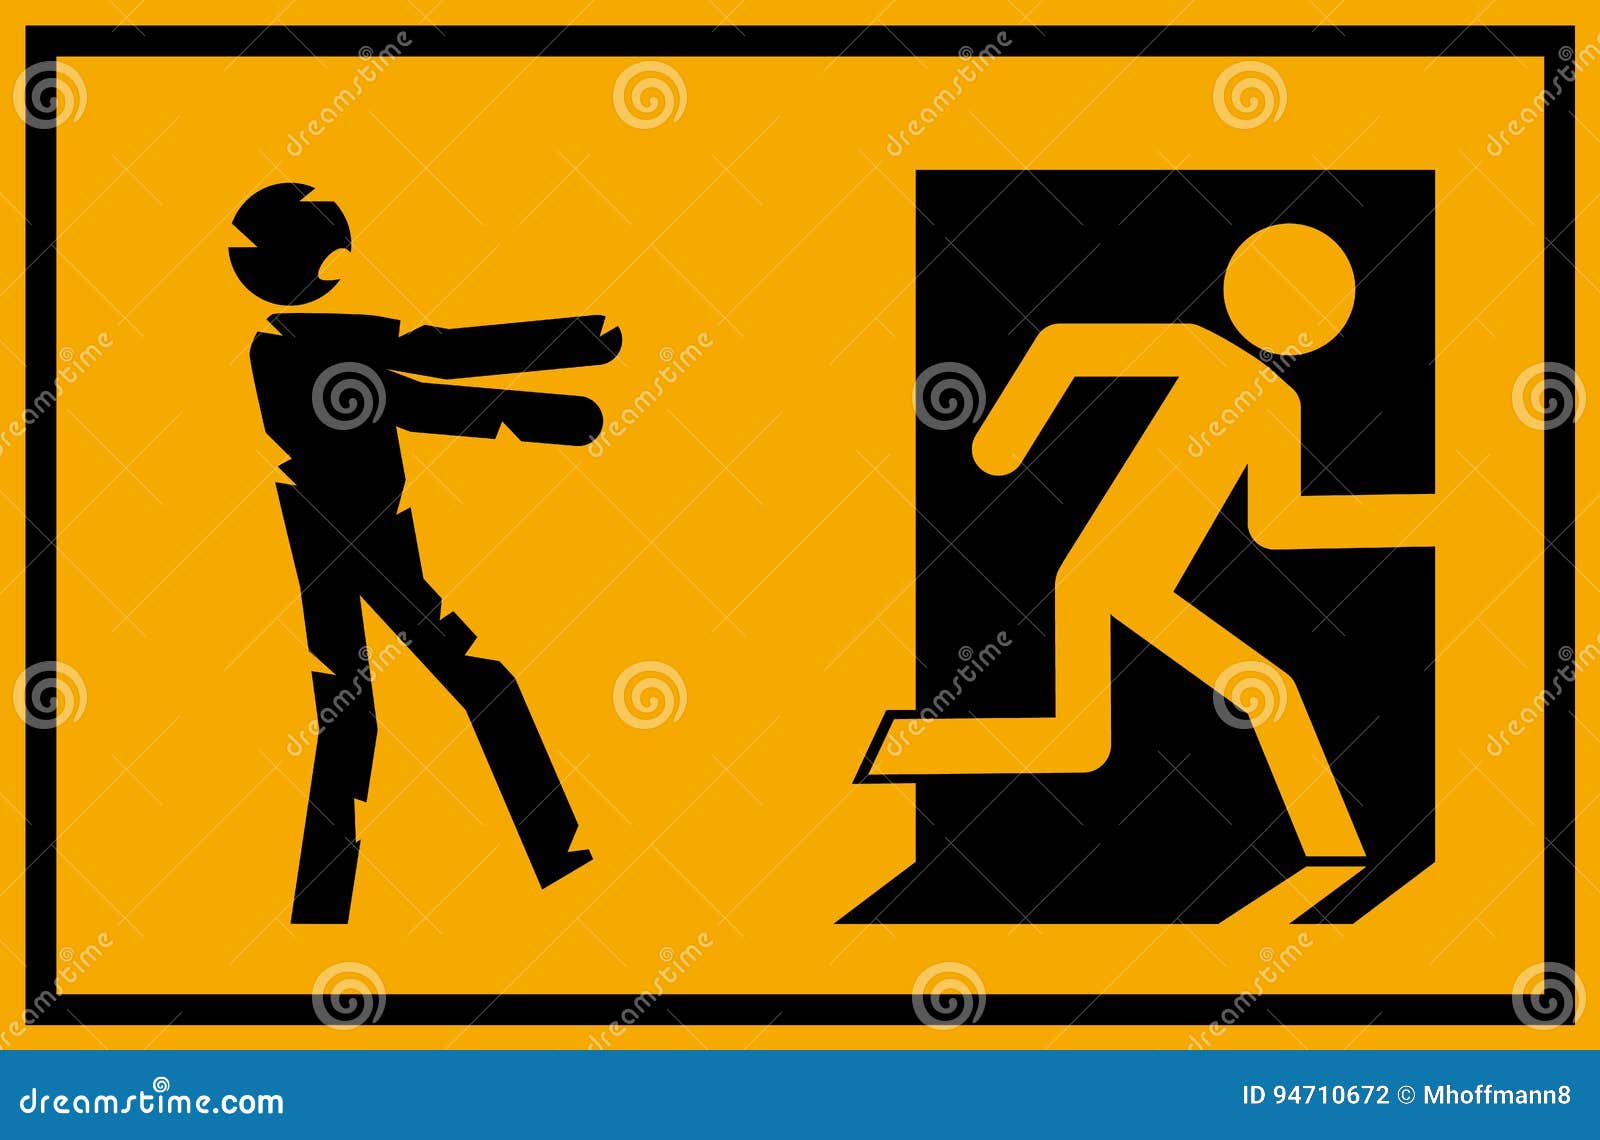   - zombie emergency exit sign with a stick figure silhouette undead chasing a person trying to escape